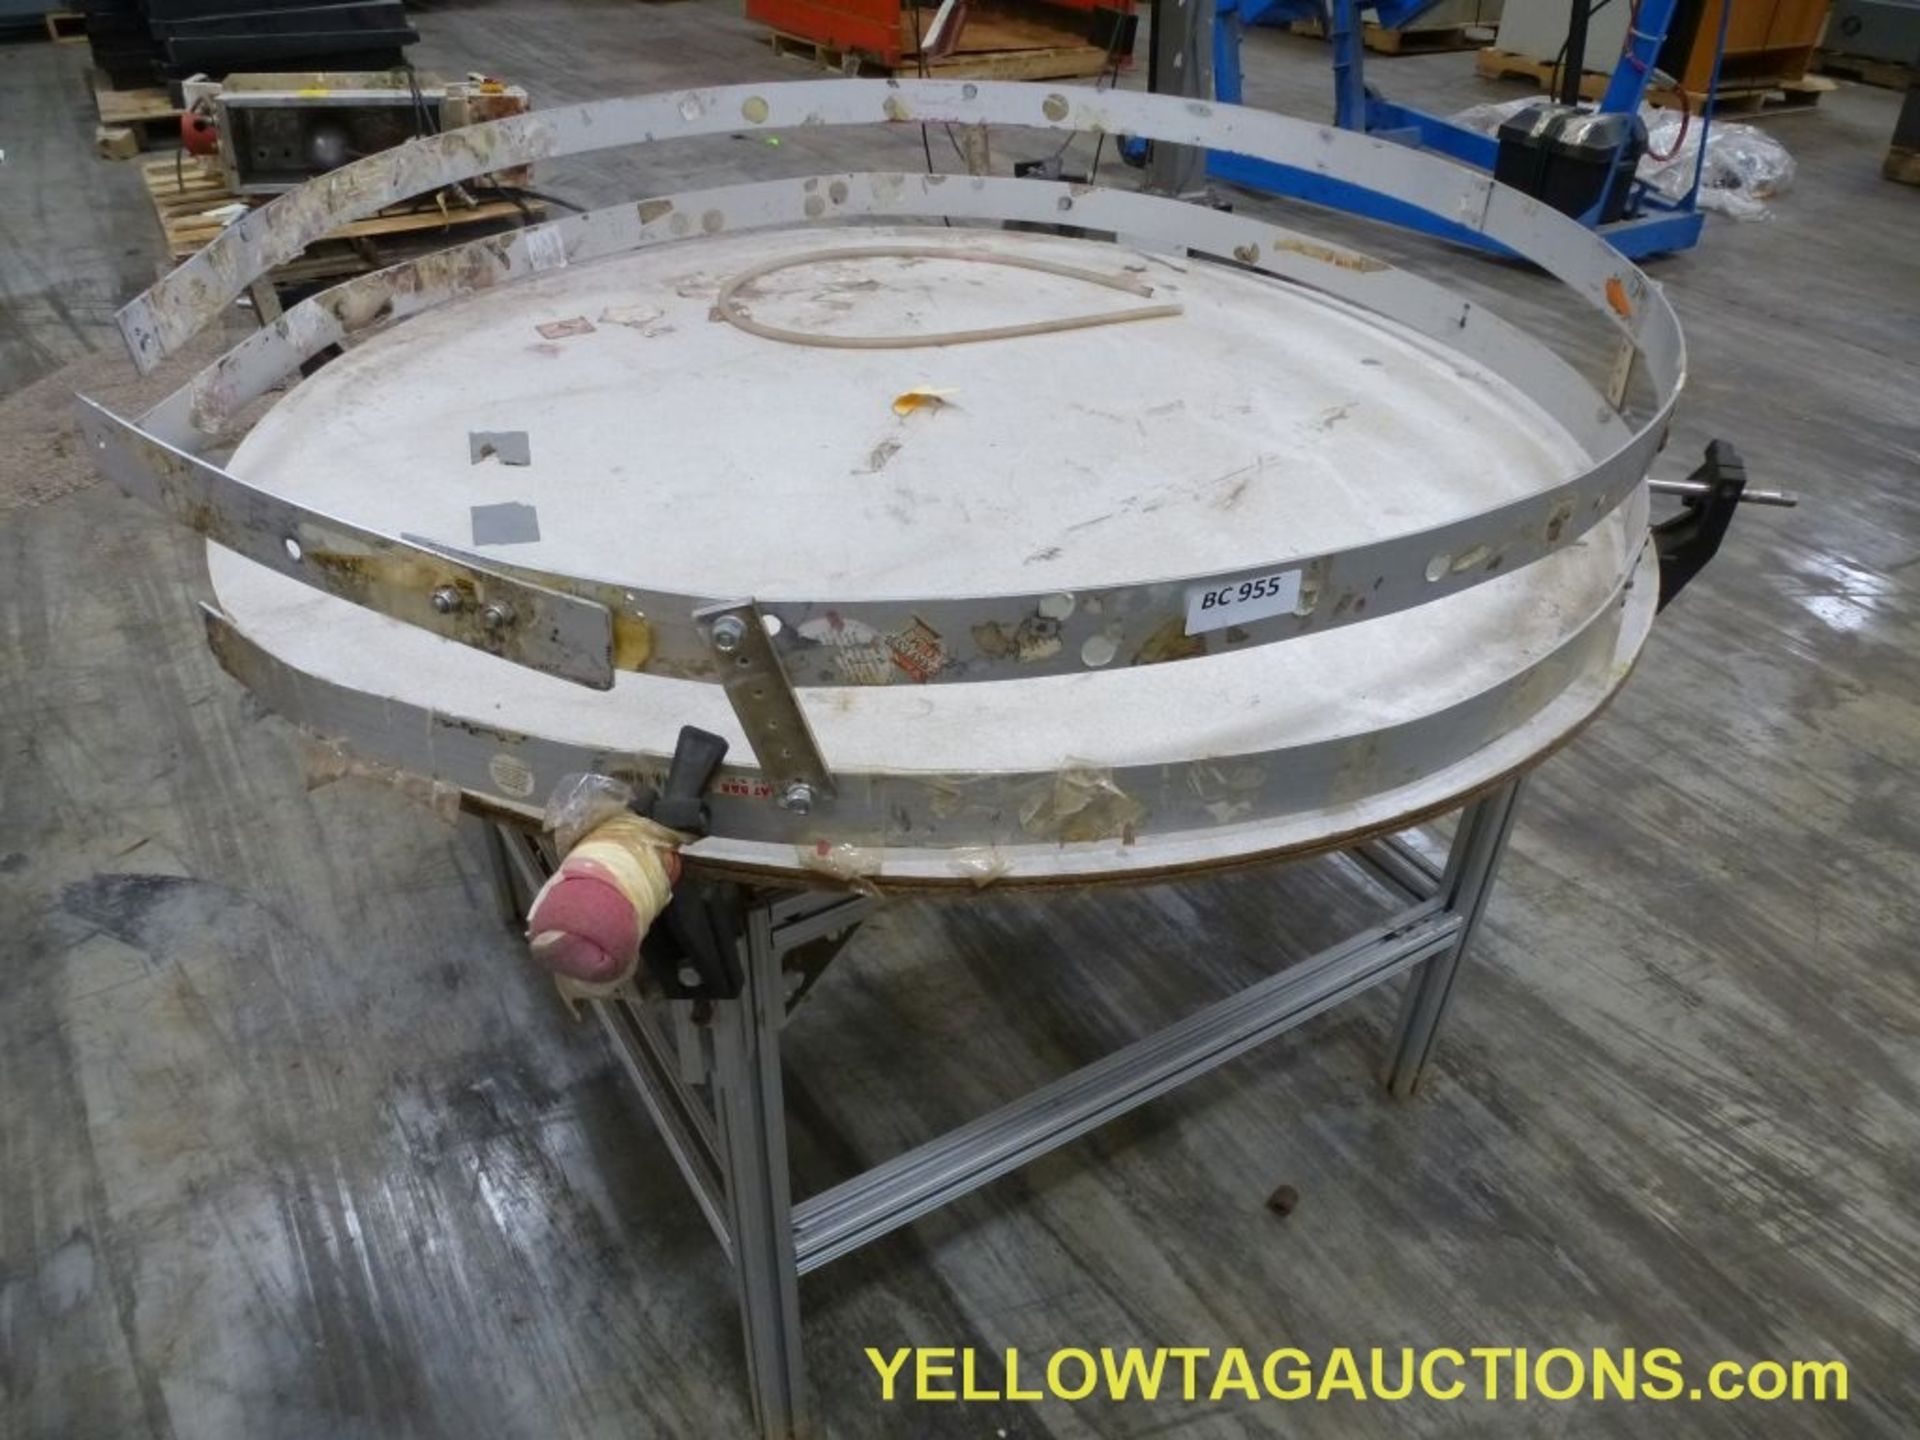 48" Rotary Table|Lot Loading Fee: $5.00 - Image 2 of 3